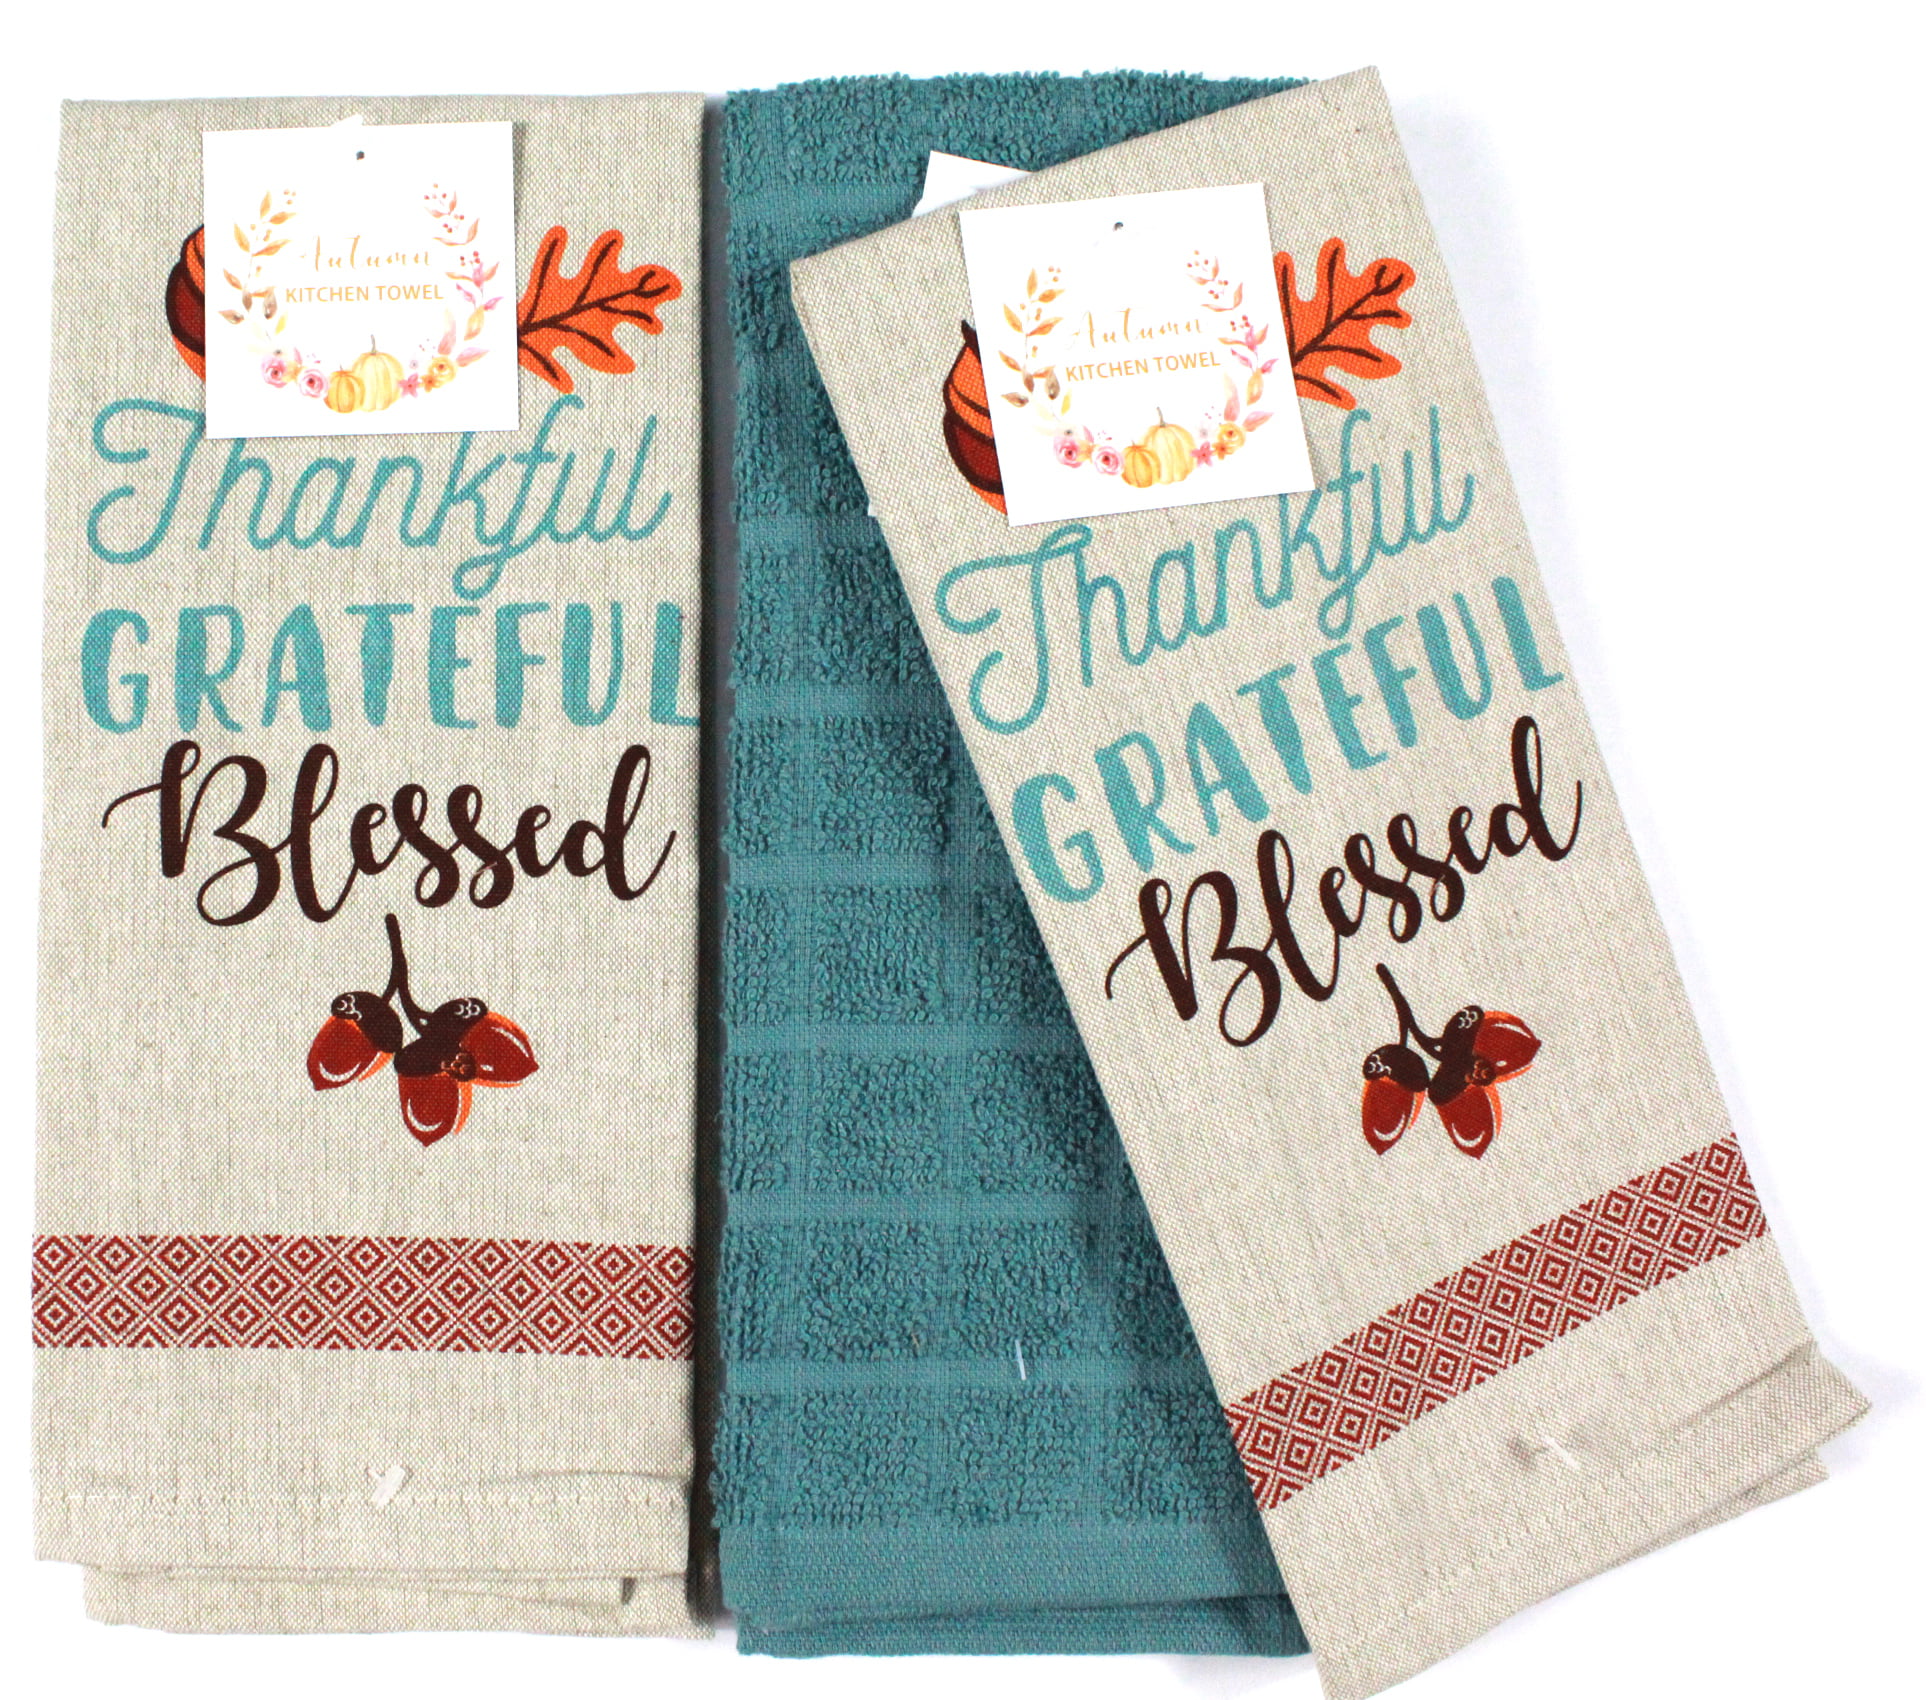 THANKFUL GRATEFUL BLESSED ON BROWN 15" x 25" GR Details about   3 SAME PRINTED KITCHEN TOWELS 